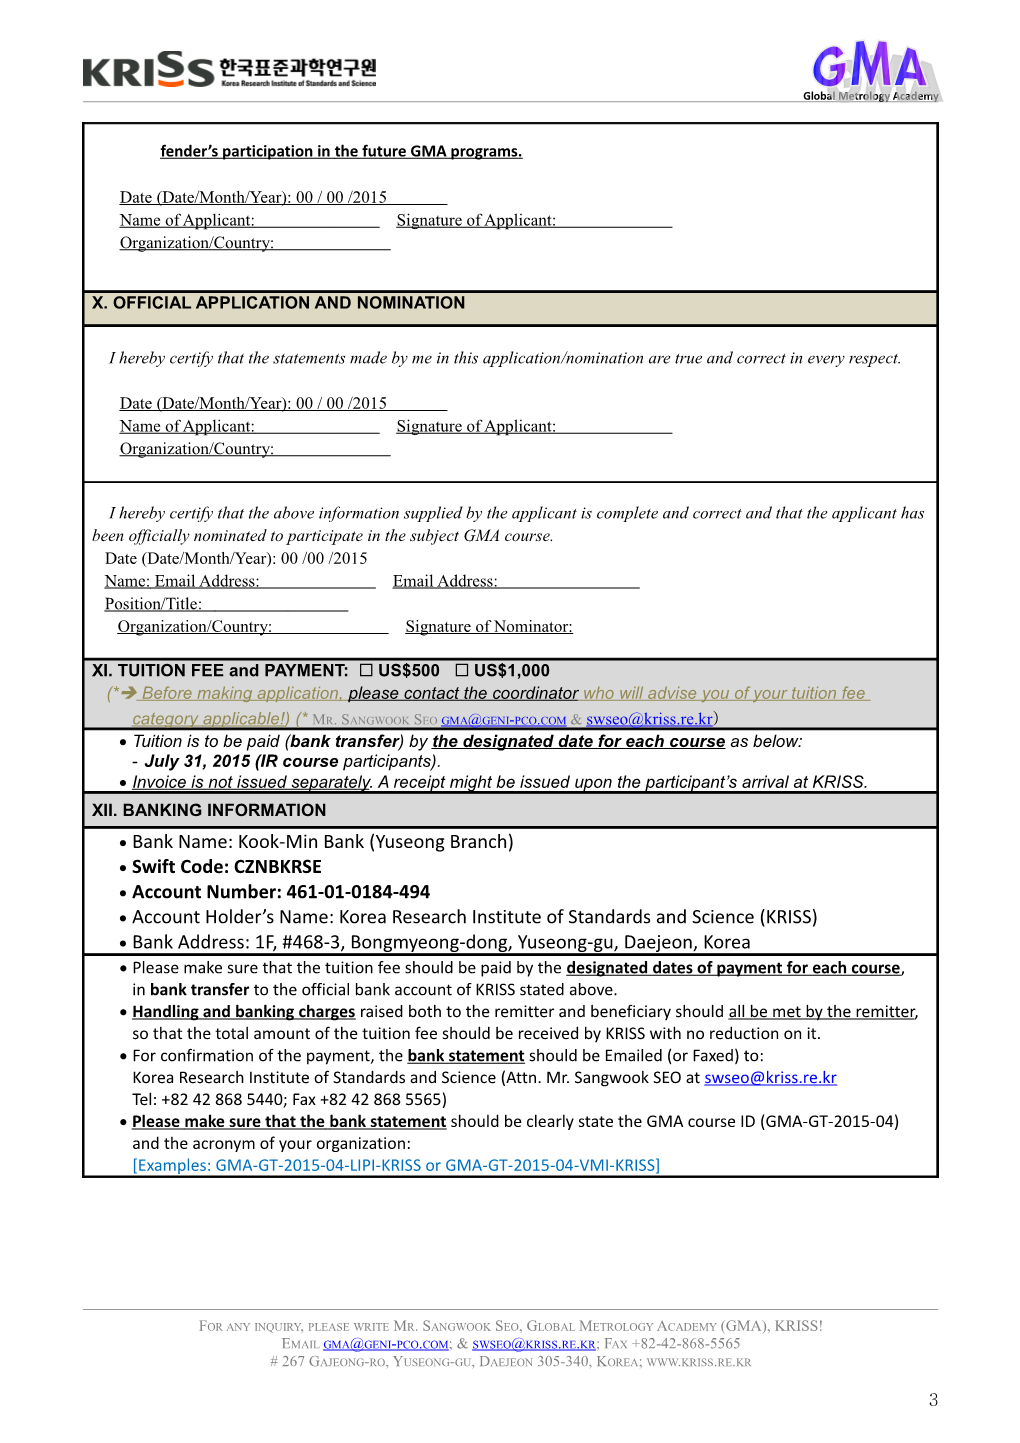 Application/Nomination Form for a GMA Group Course 2015